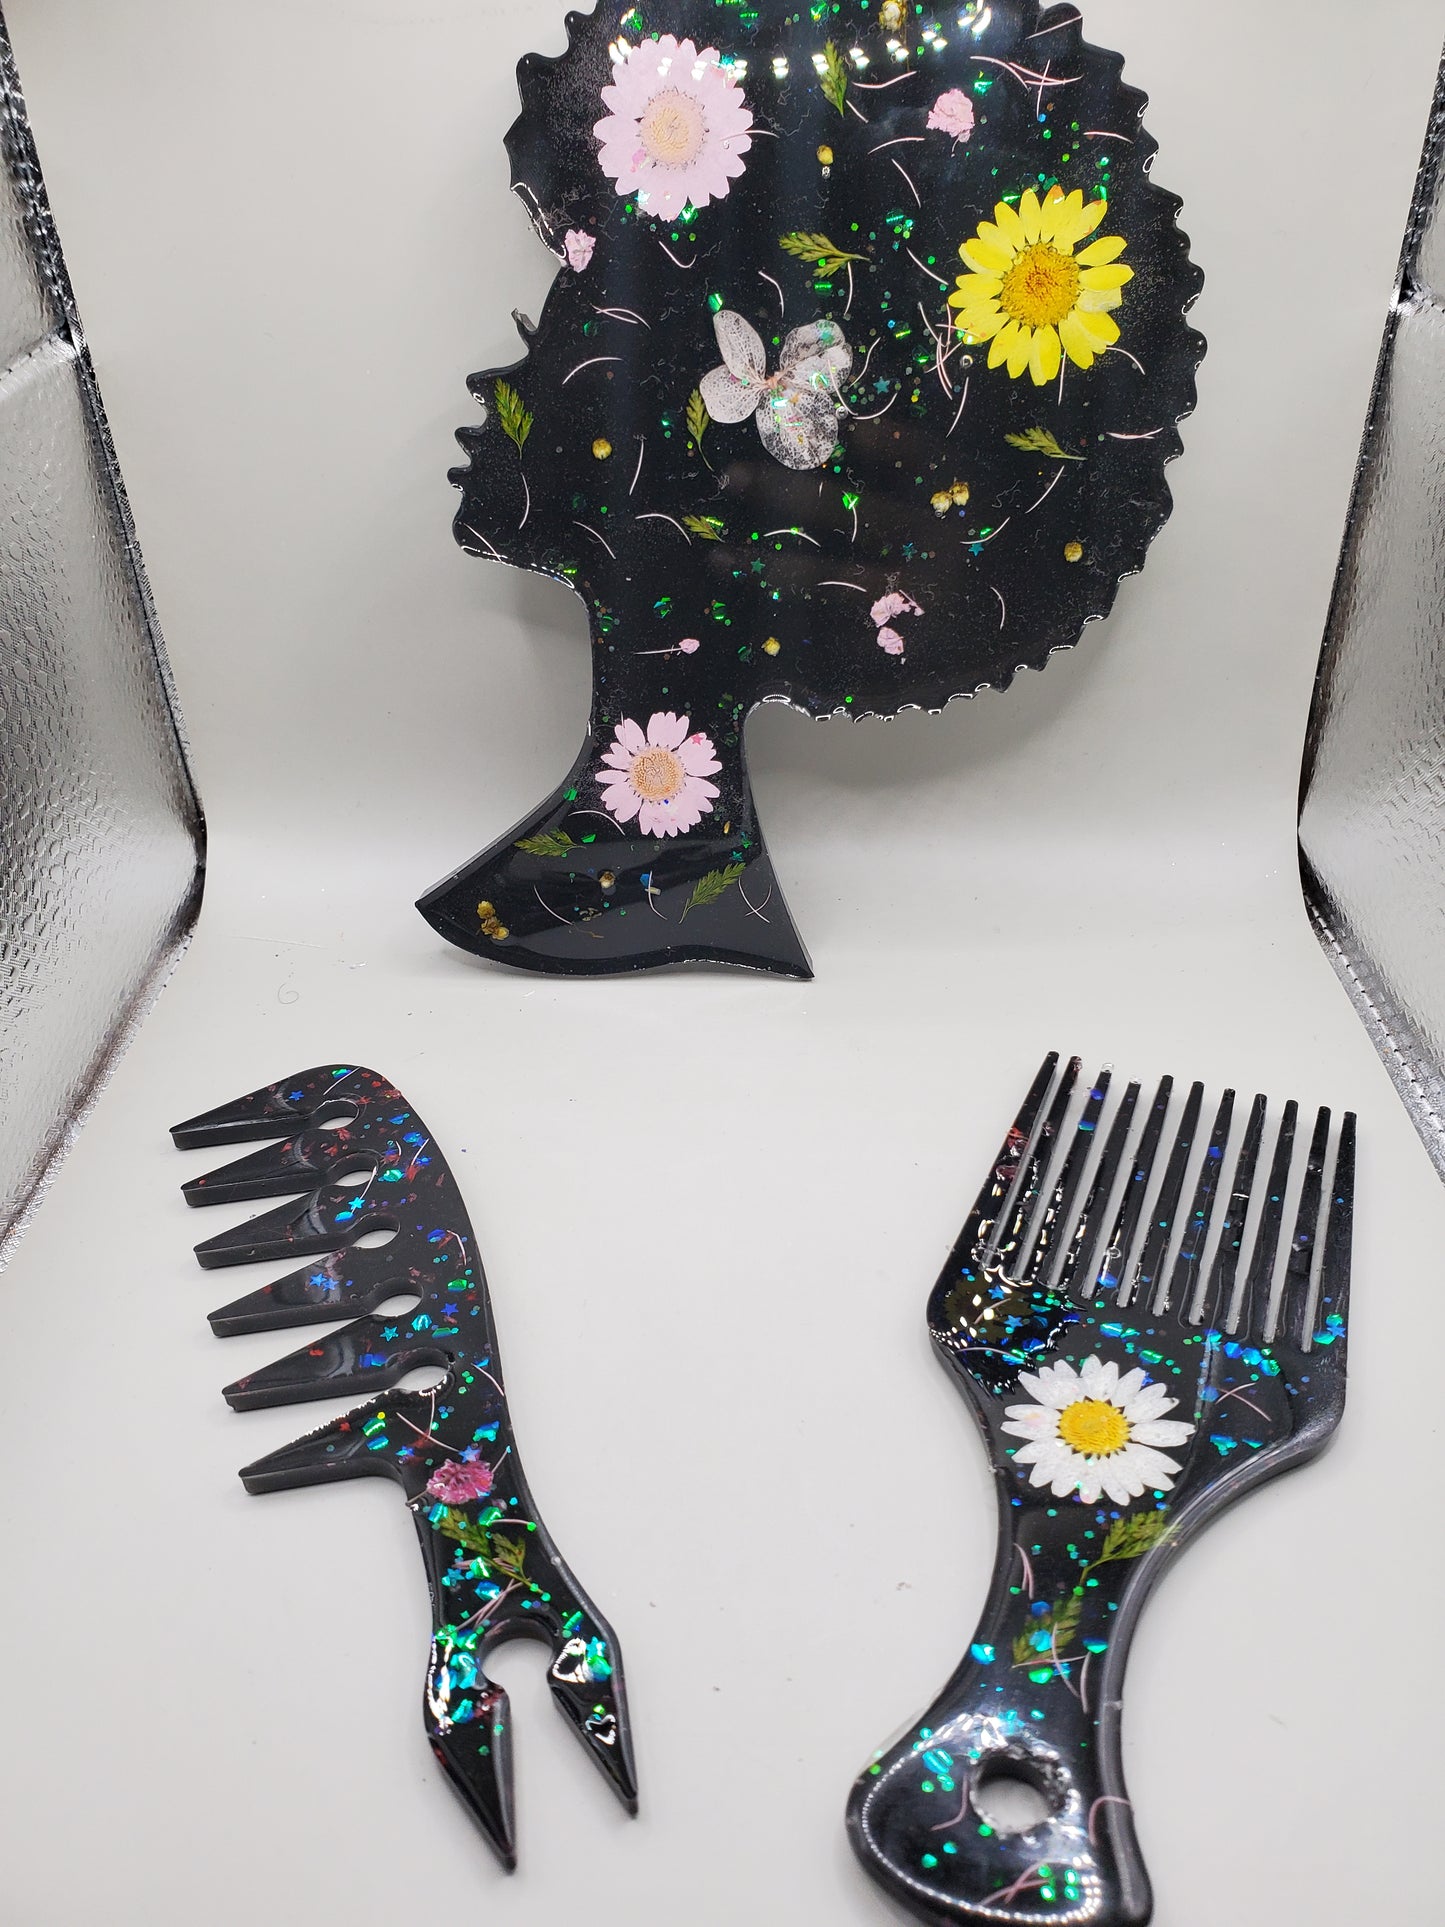 Handheld Mirror and Comb sets